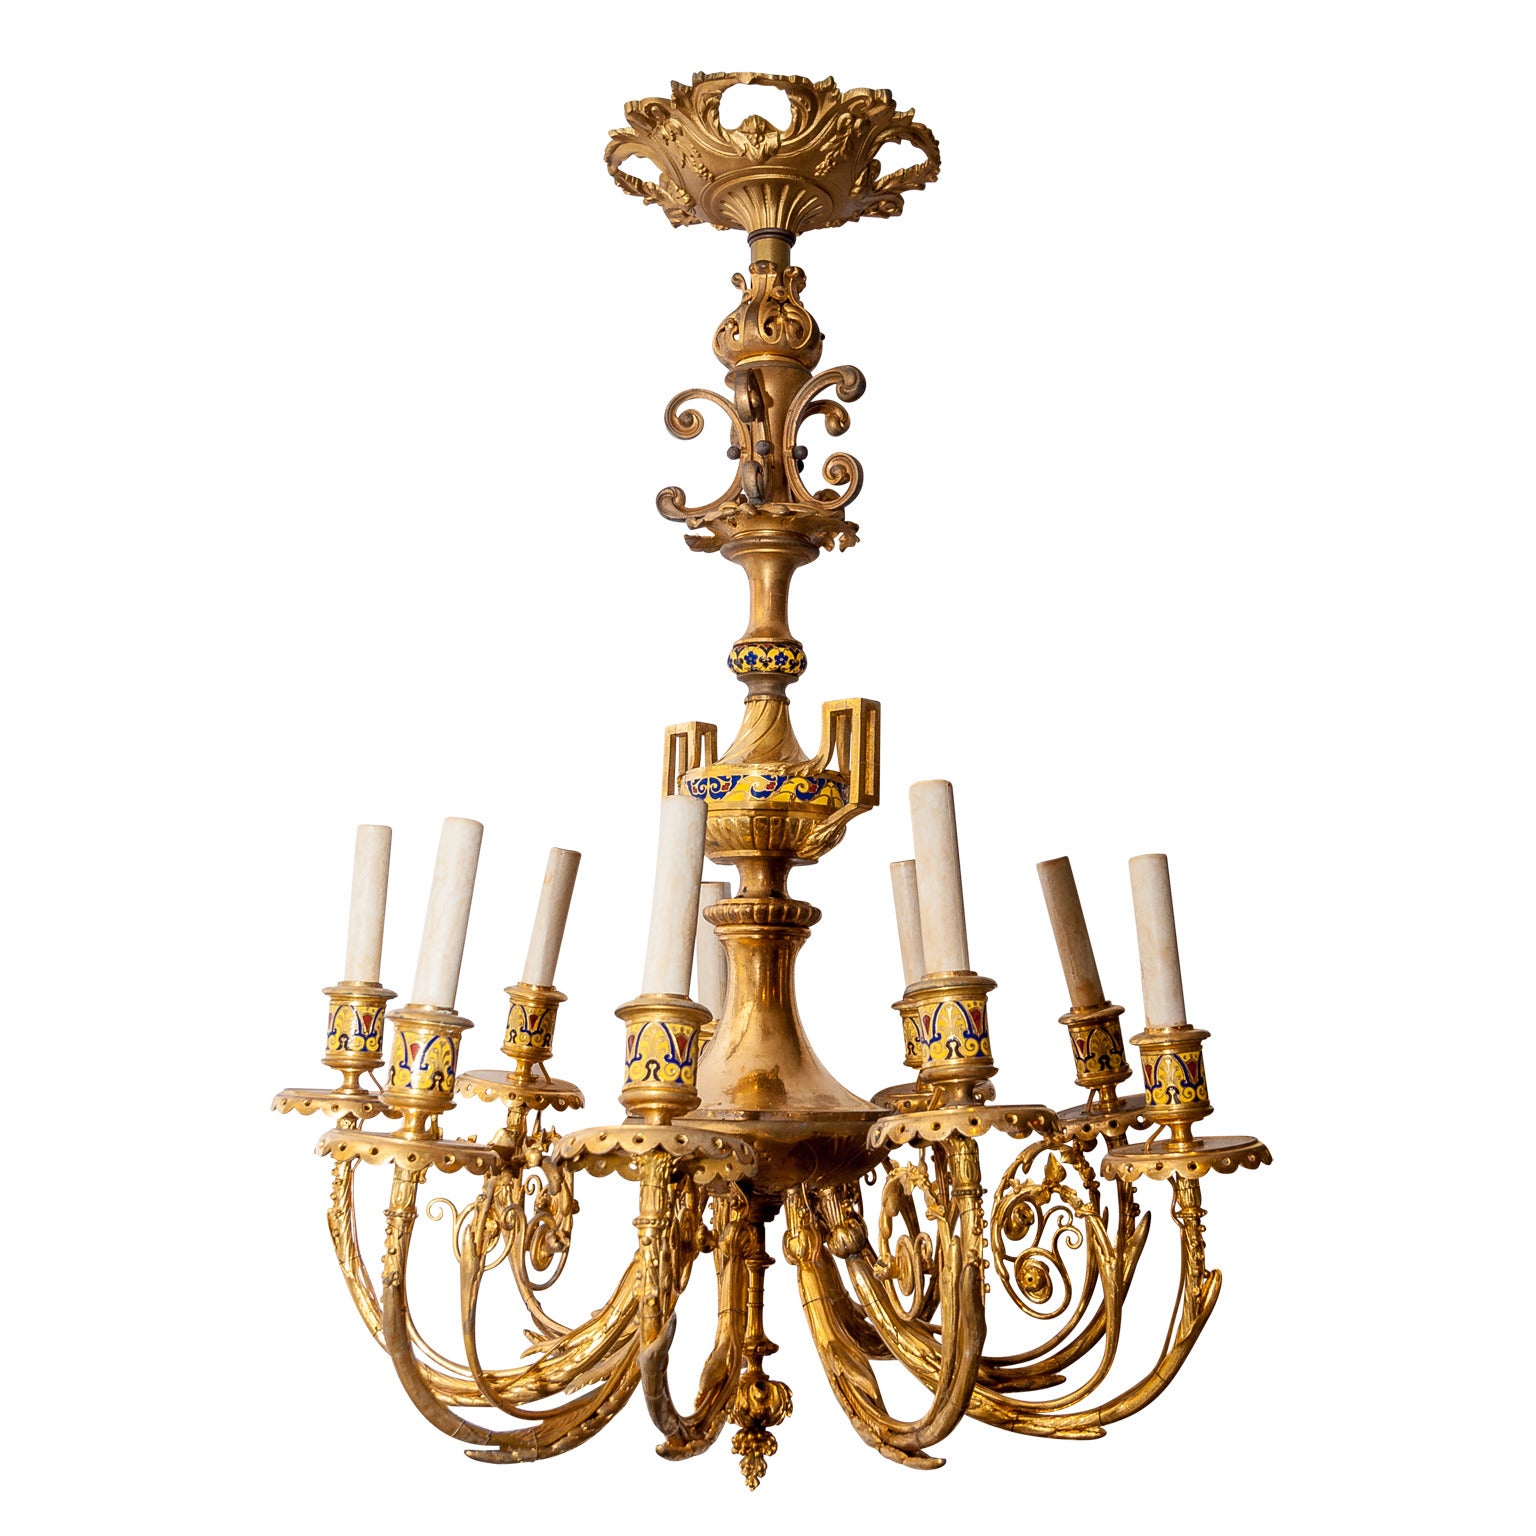 19th Century French Champleve Enamel and Bronze Nine-Light Chandelier